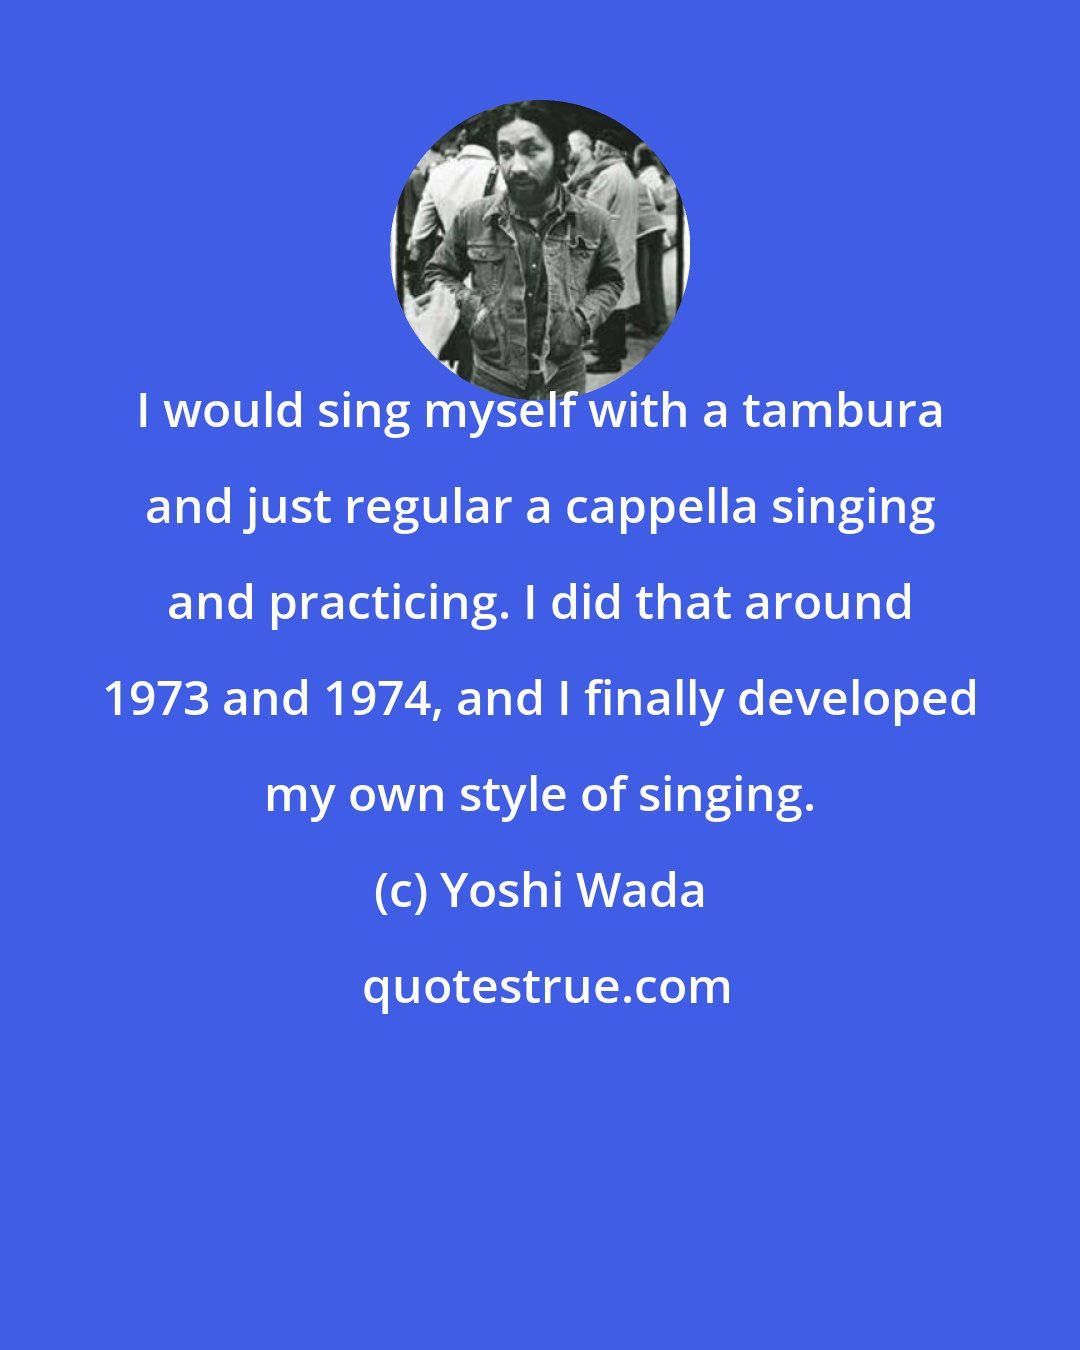 Yoshi Wada: I would sing myself with a tambura and just regular a cappella singing and practicing. I did that around 1973 and 1974, and I finally developed my own style of singing.